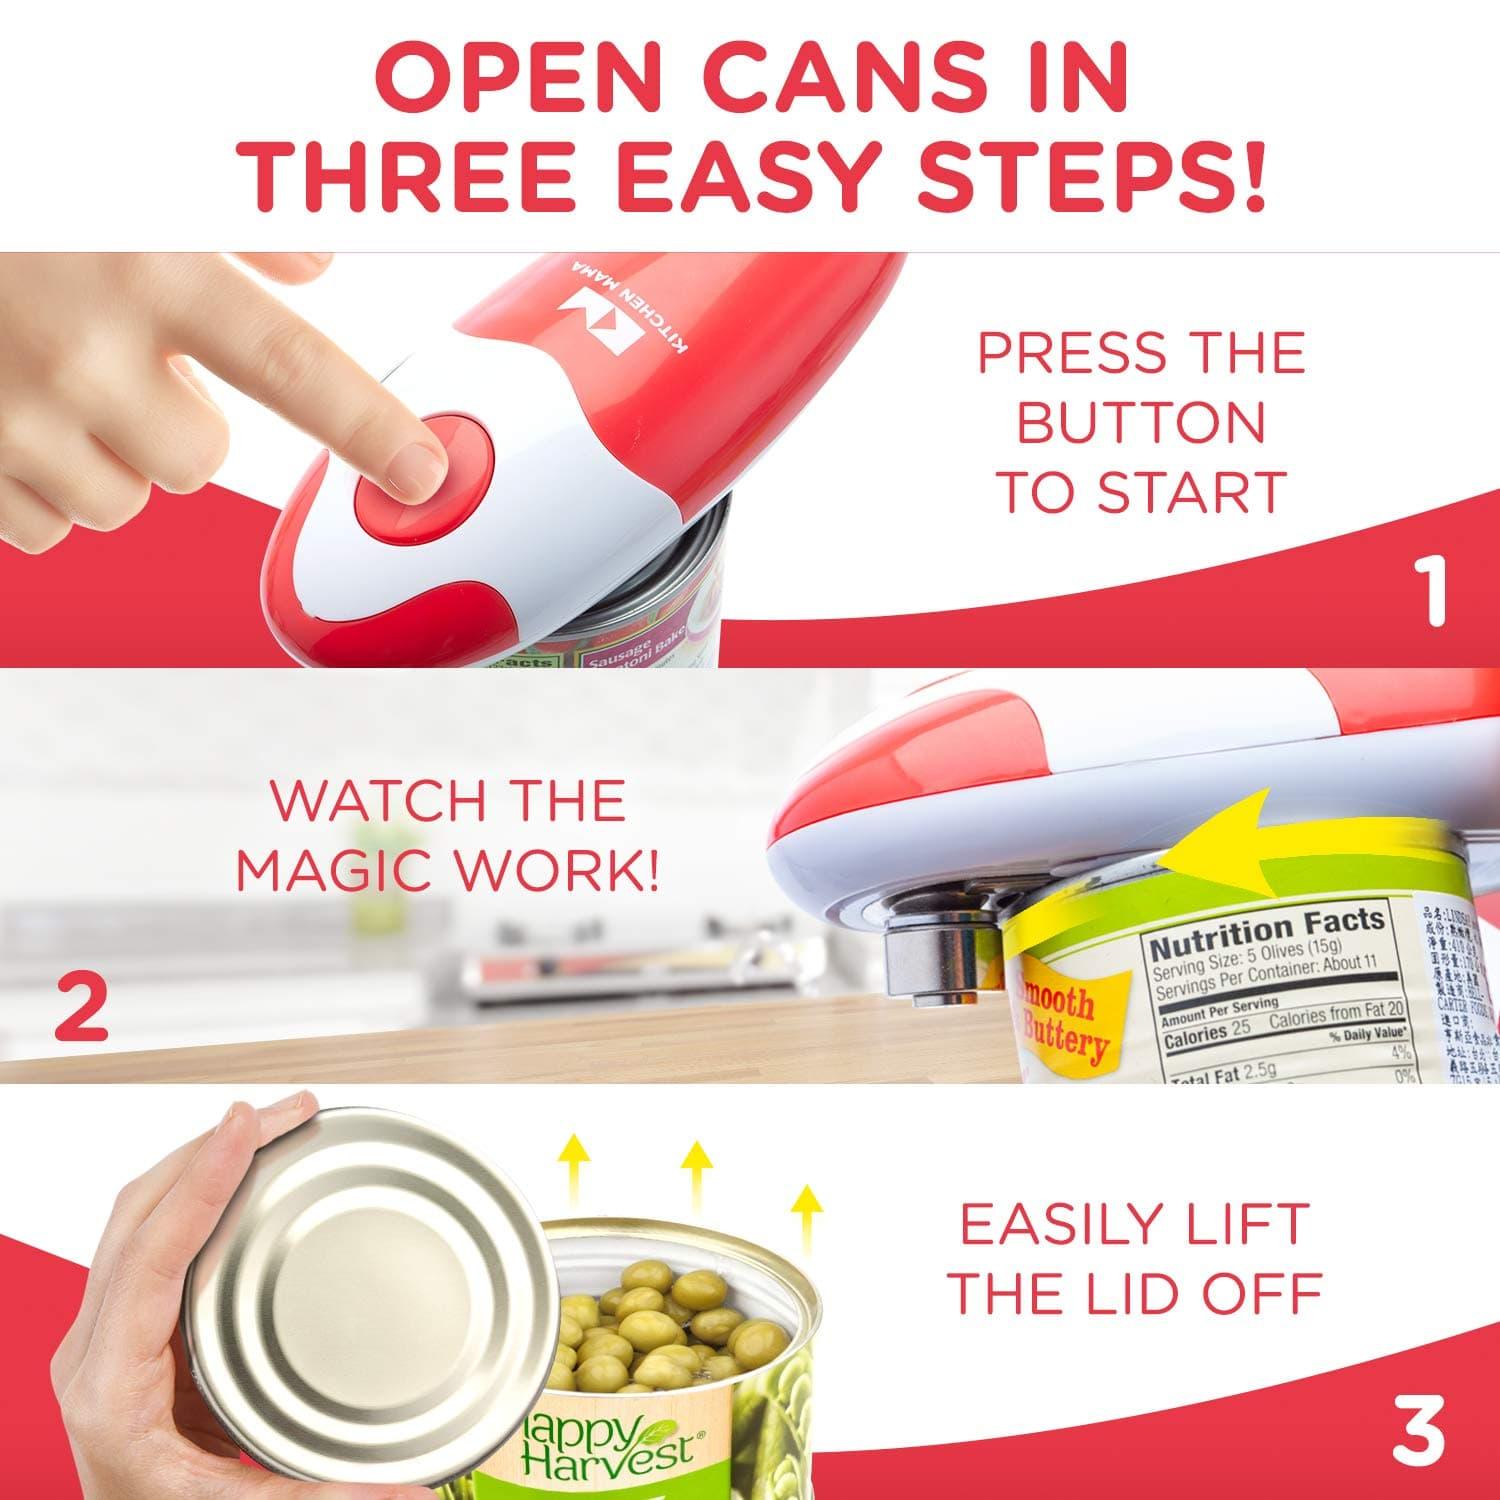 Auto Electric Can Opener - The #1 Best Seller - Kitchen Mama